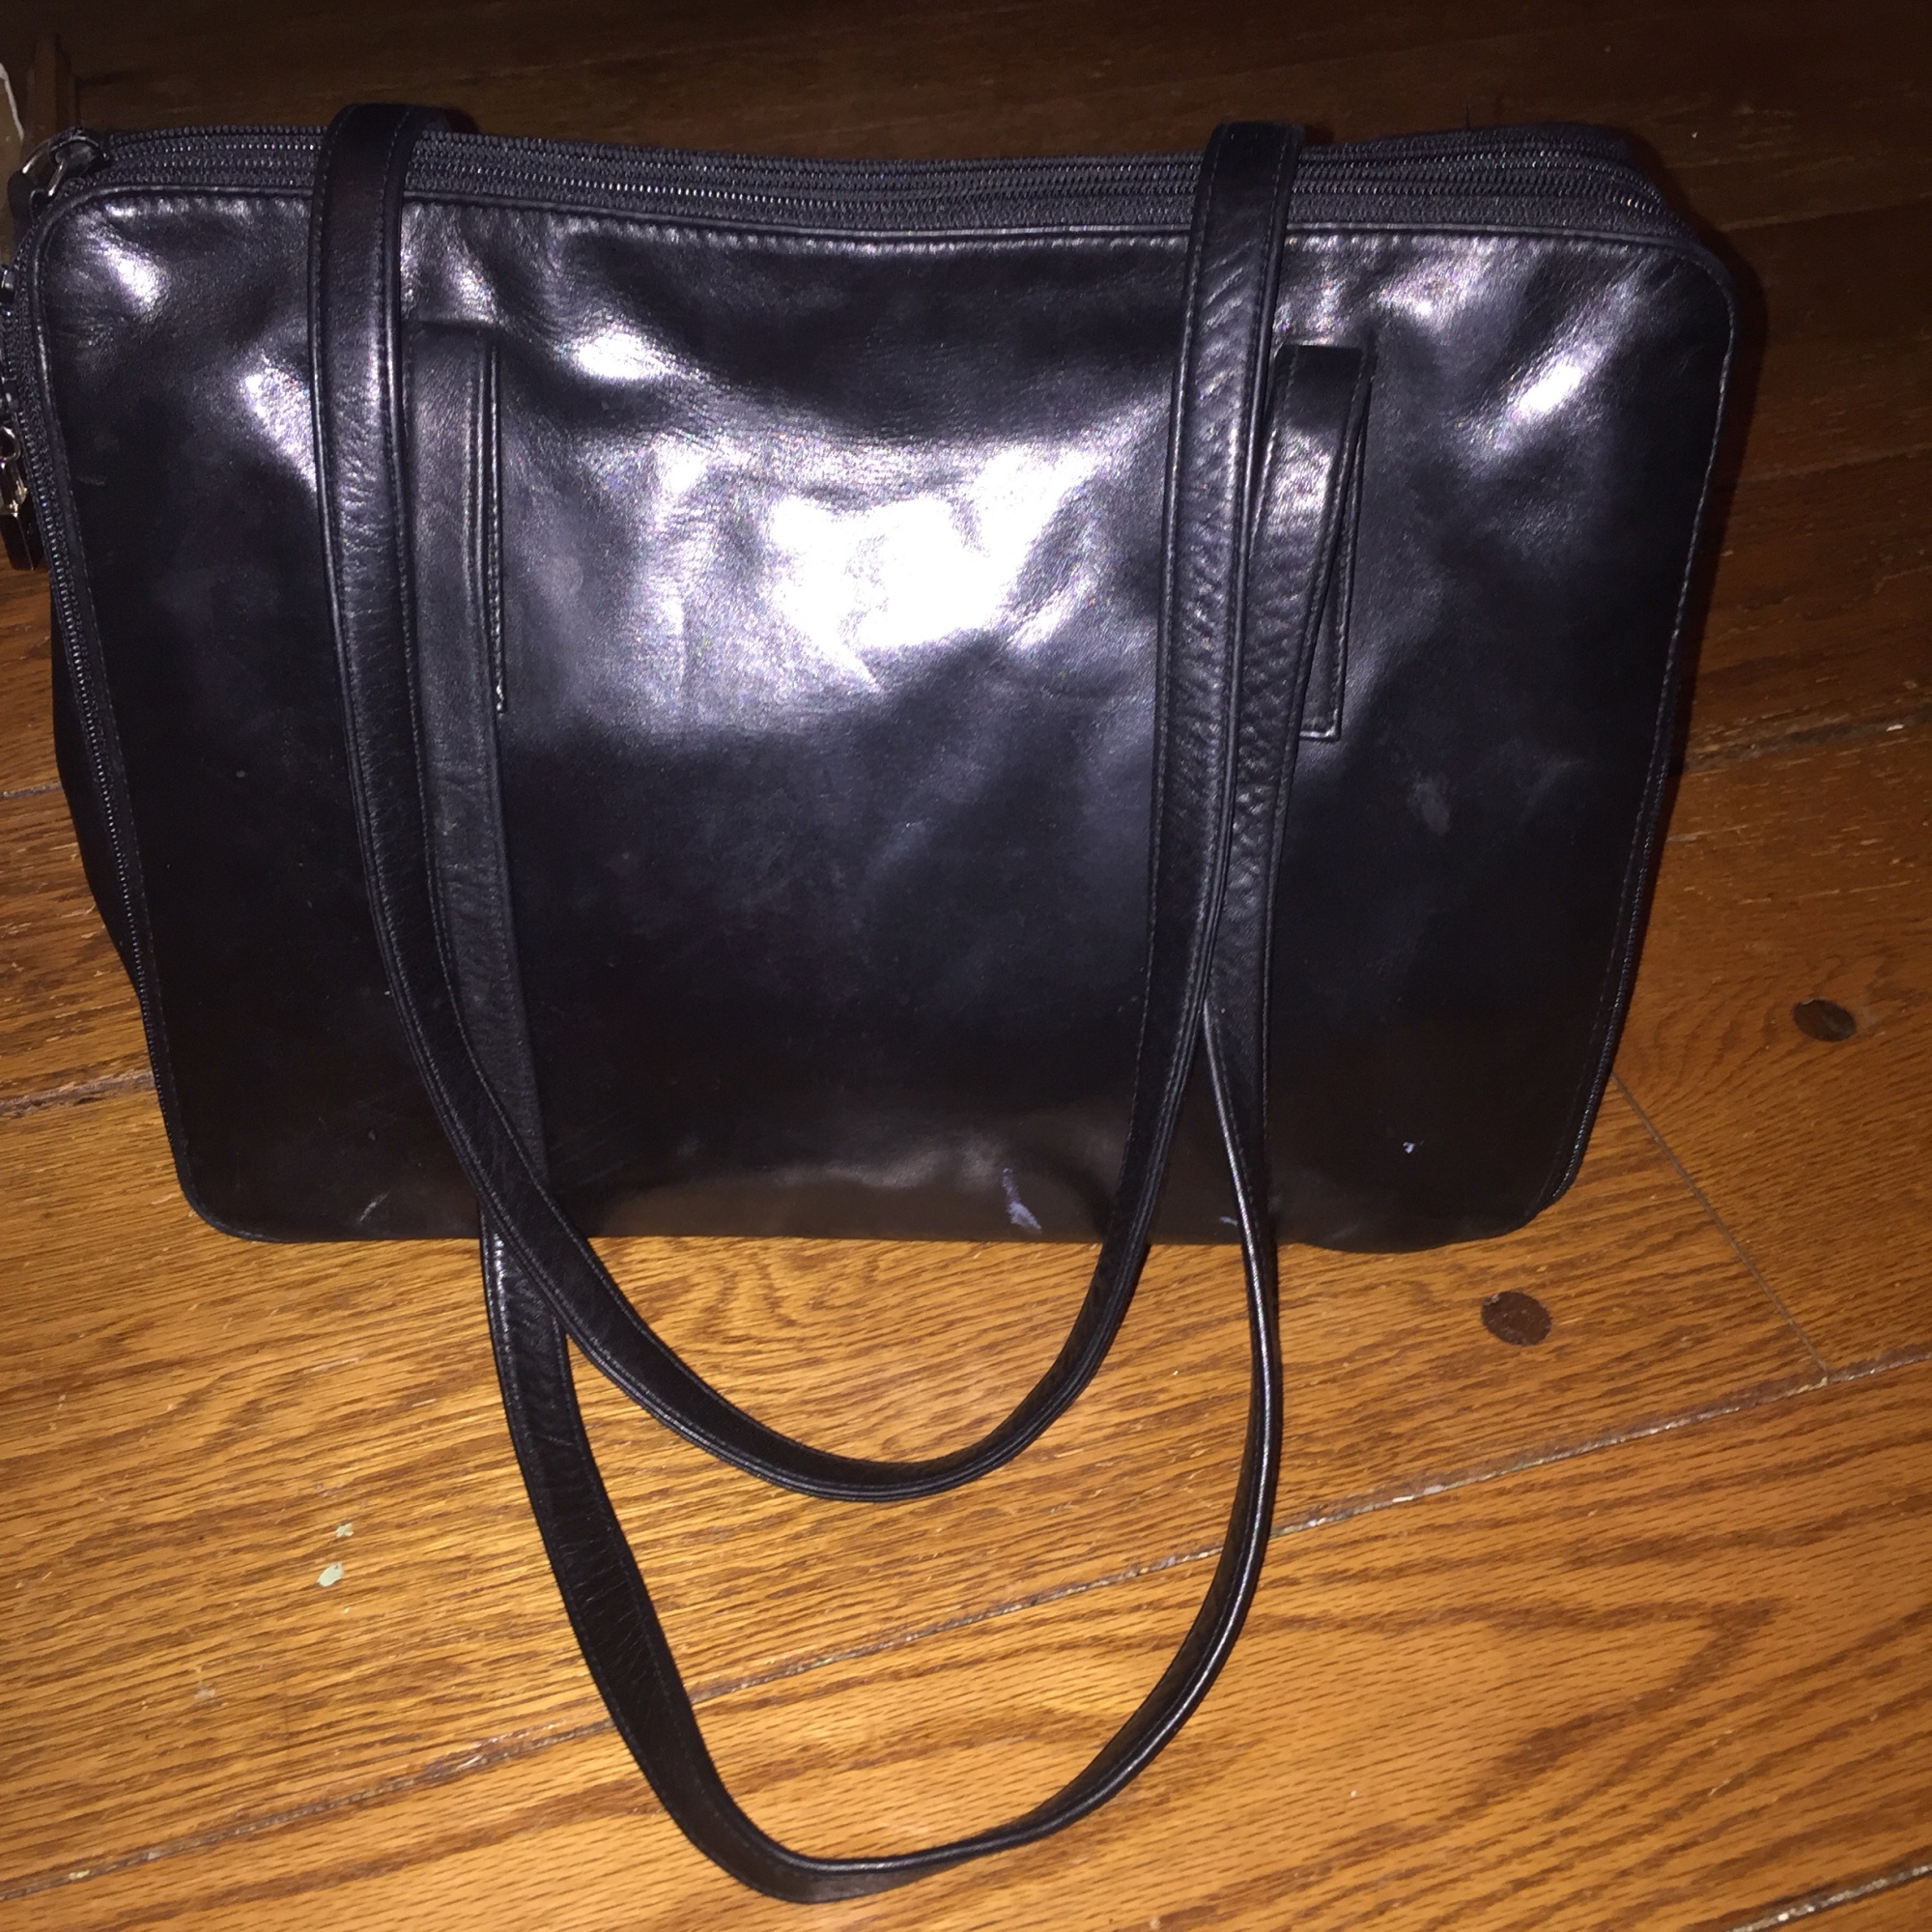 50 favorite bags | Giving away a bag most days in Lent 2022